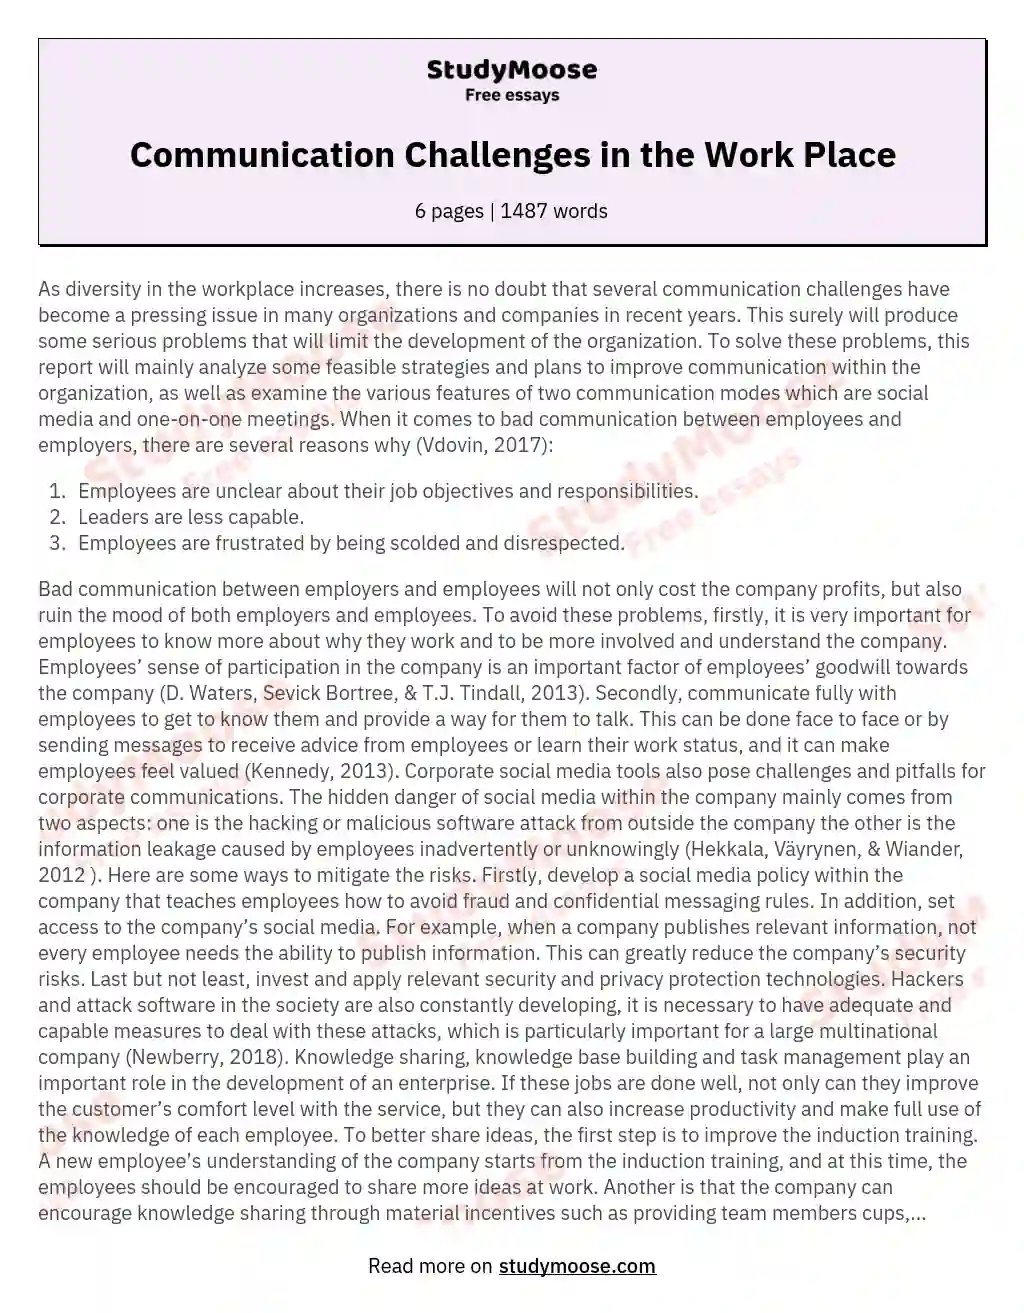 Communication Challenges in the Work Place essay